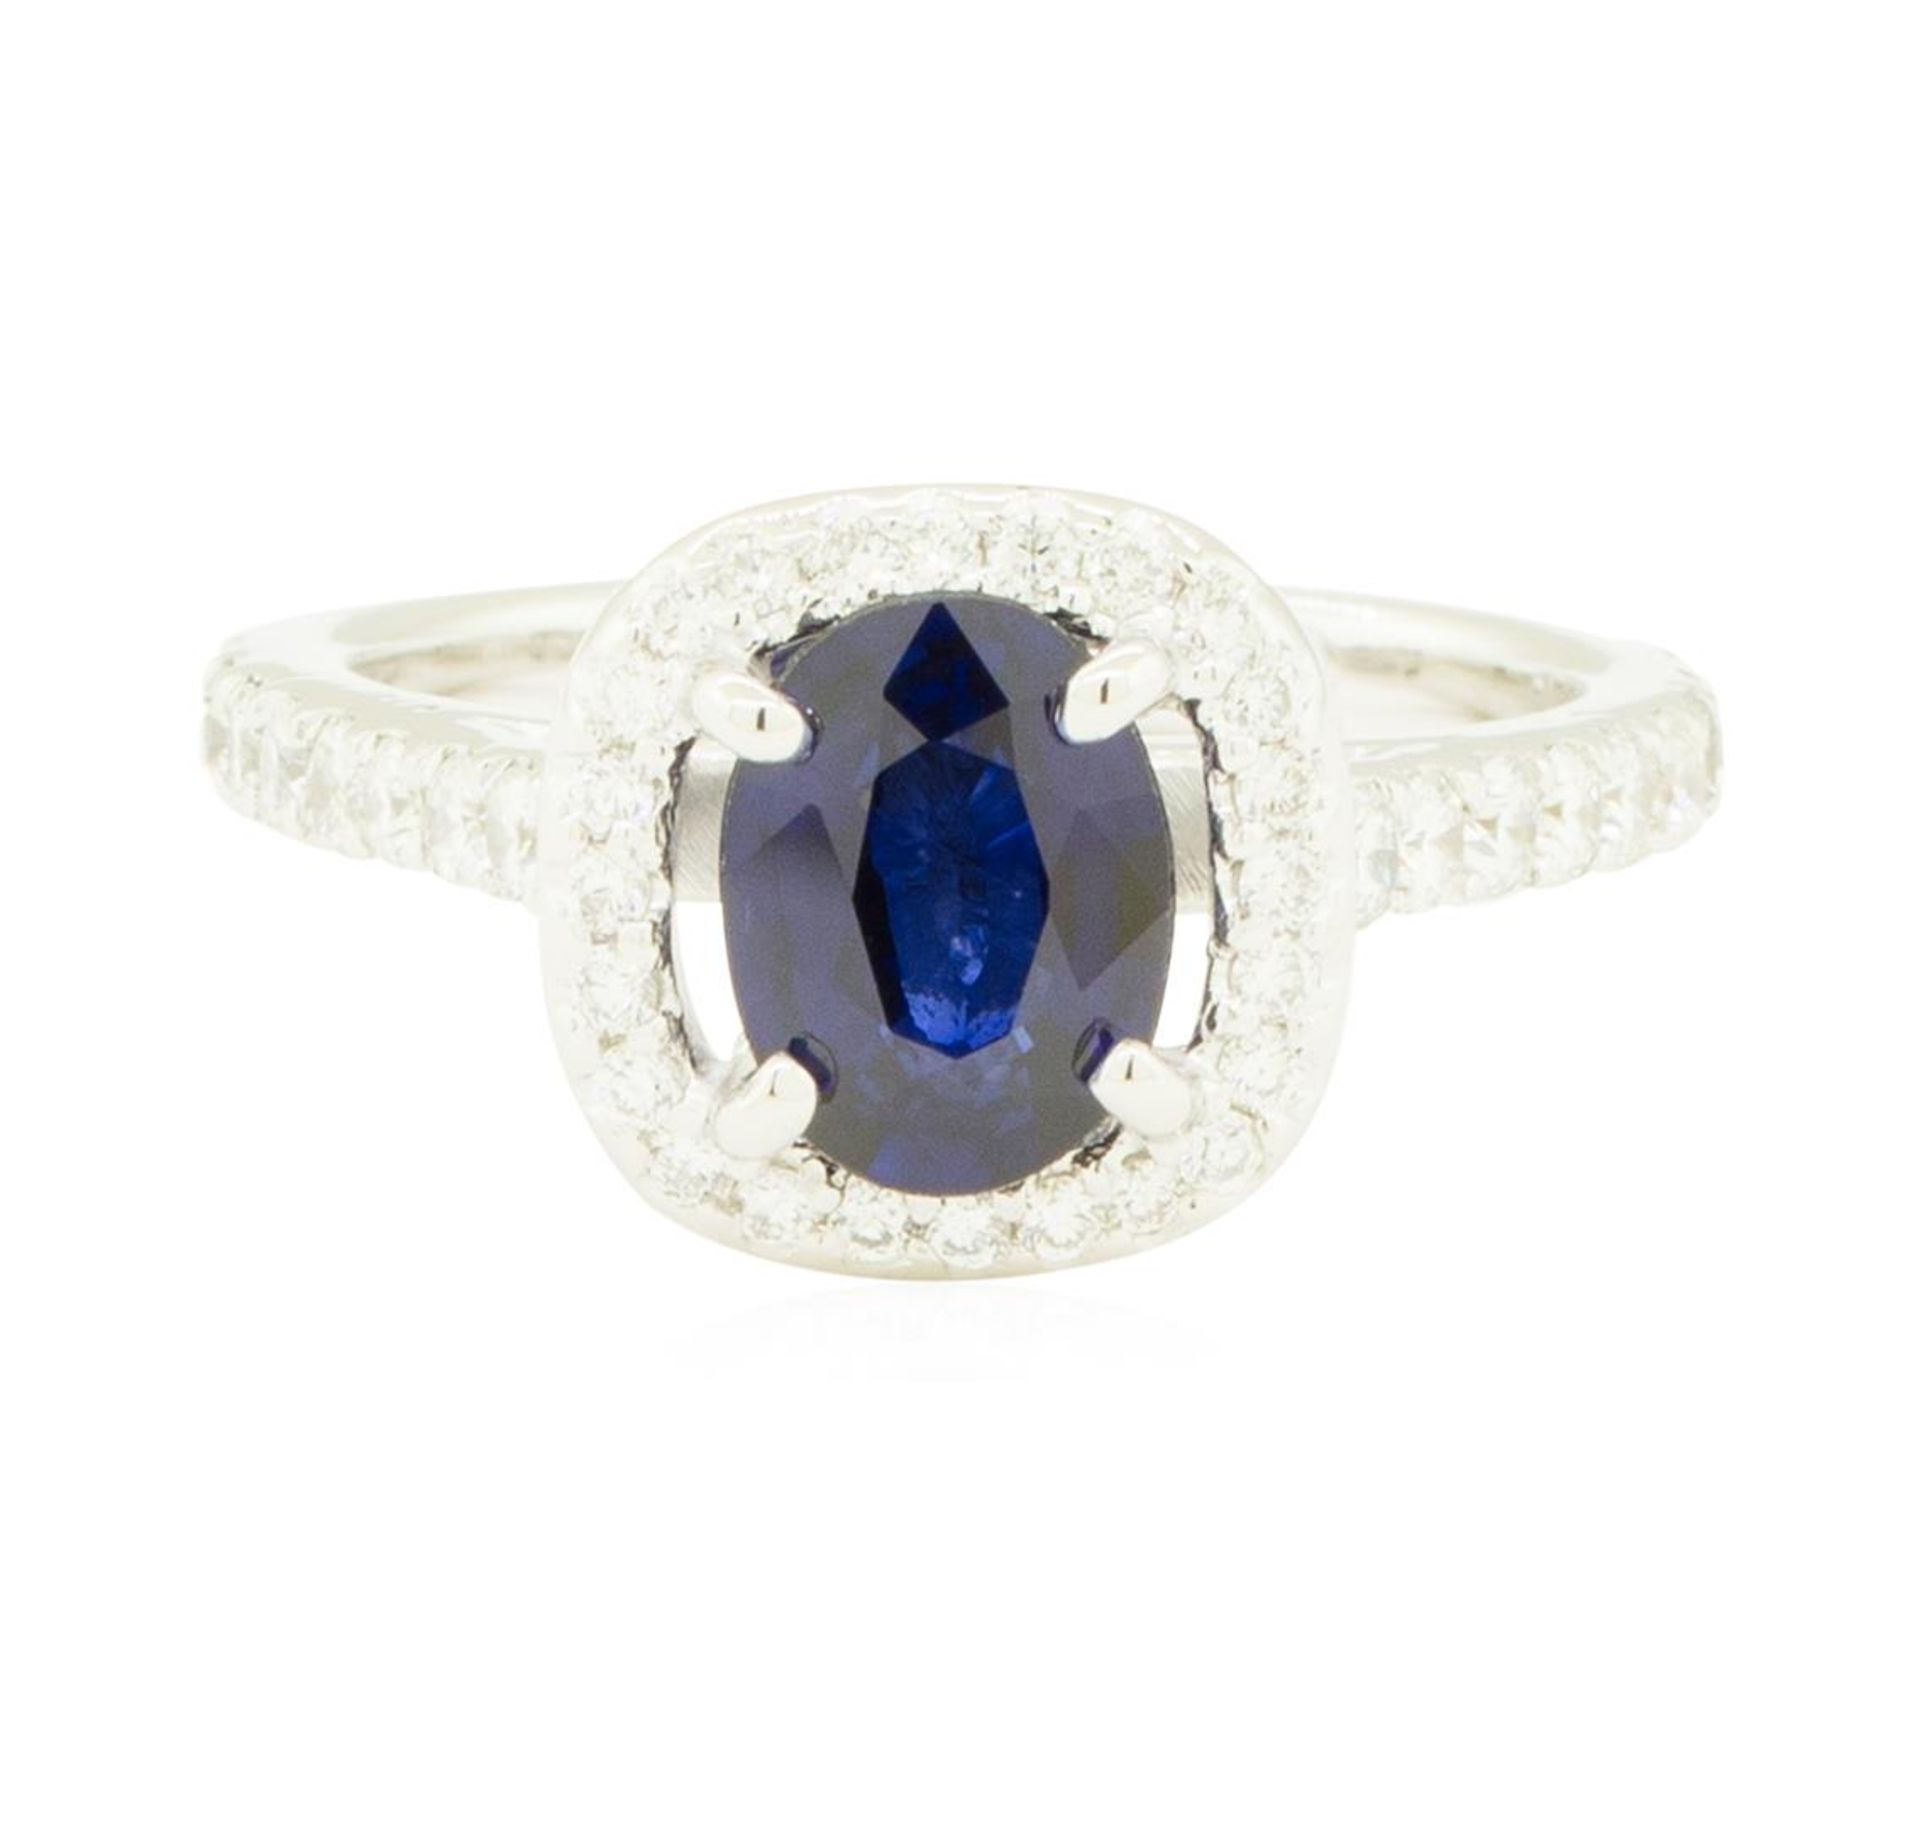 1.94 ctw Oval Brilliant Blue Sapphire And Diamond Ring - 14KT White Gold - Image 2 of 5